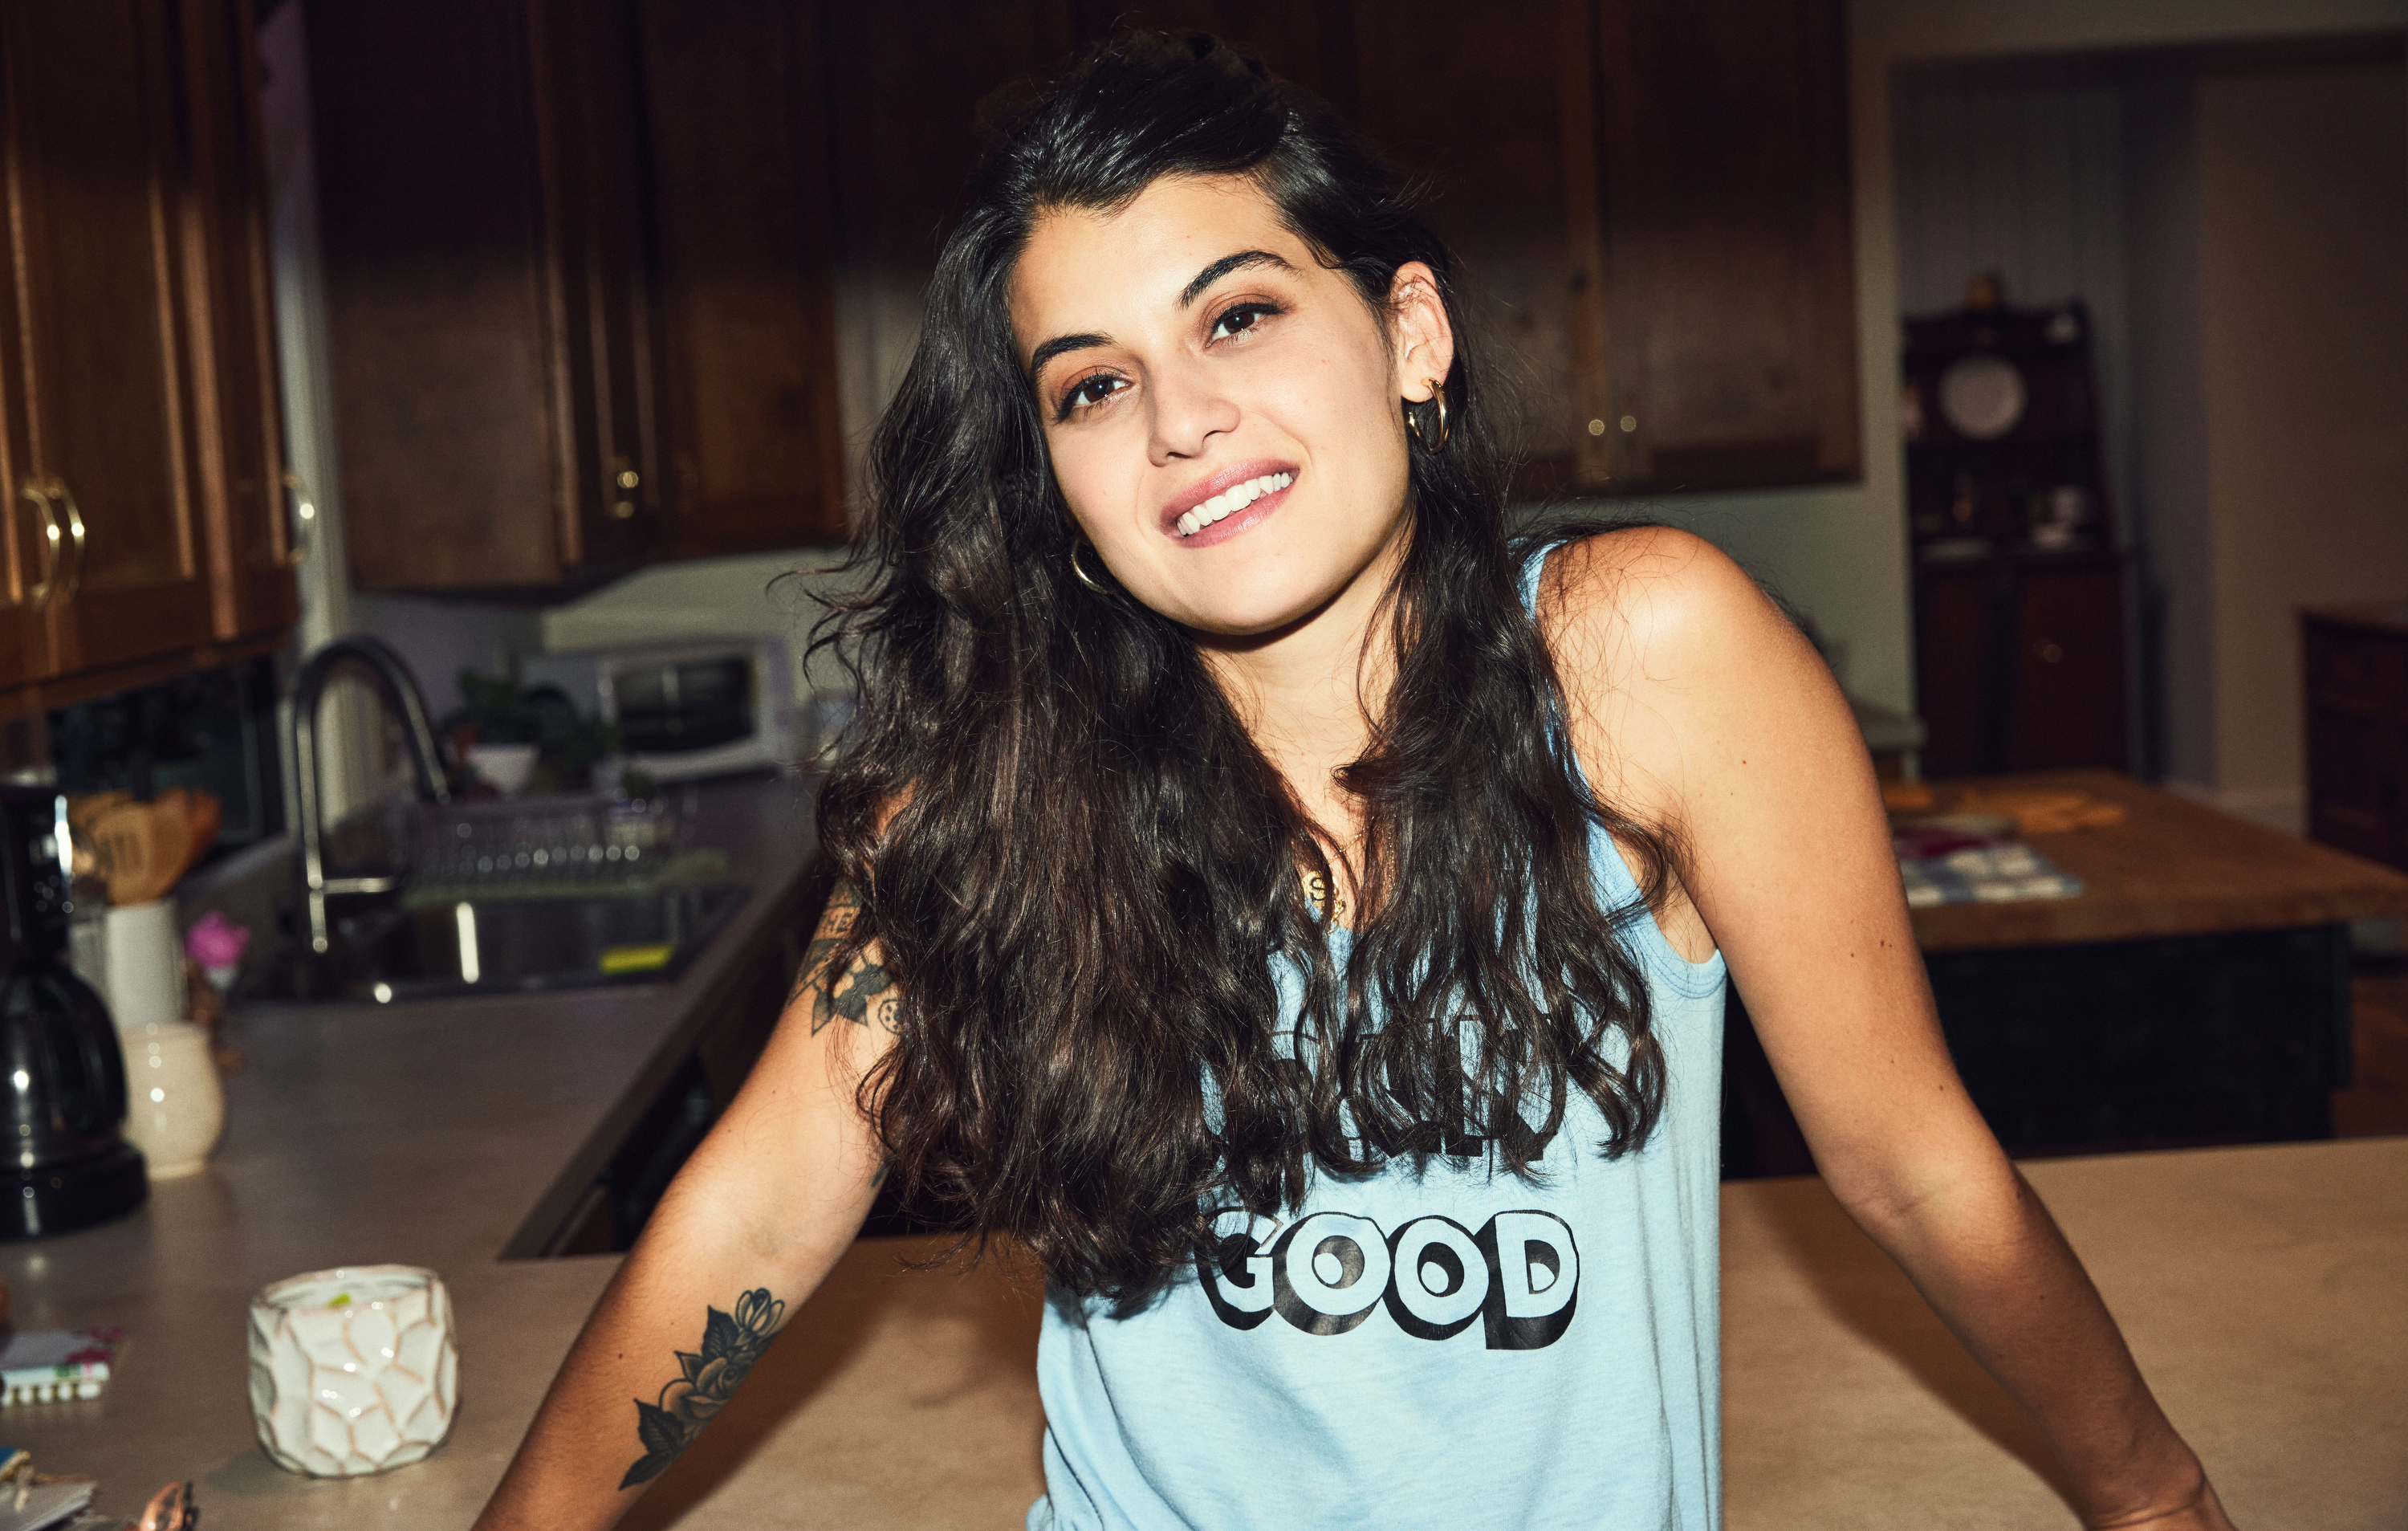 Single Drunk Female star Sofia Black-DElia on recovery, addiction and her pic pic